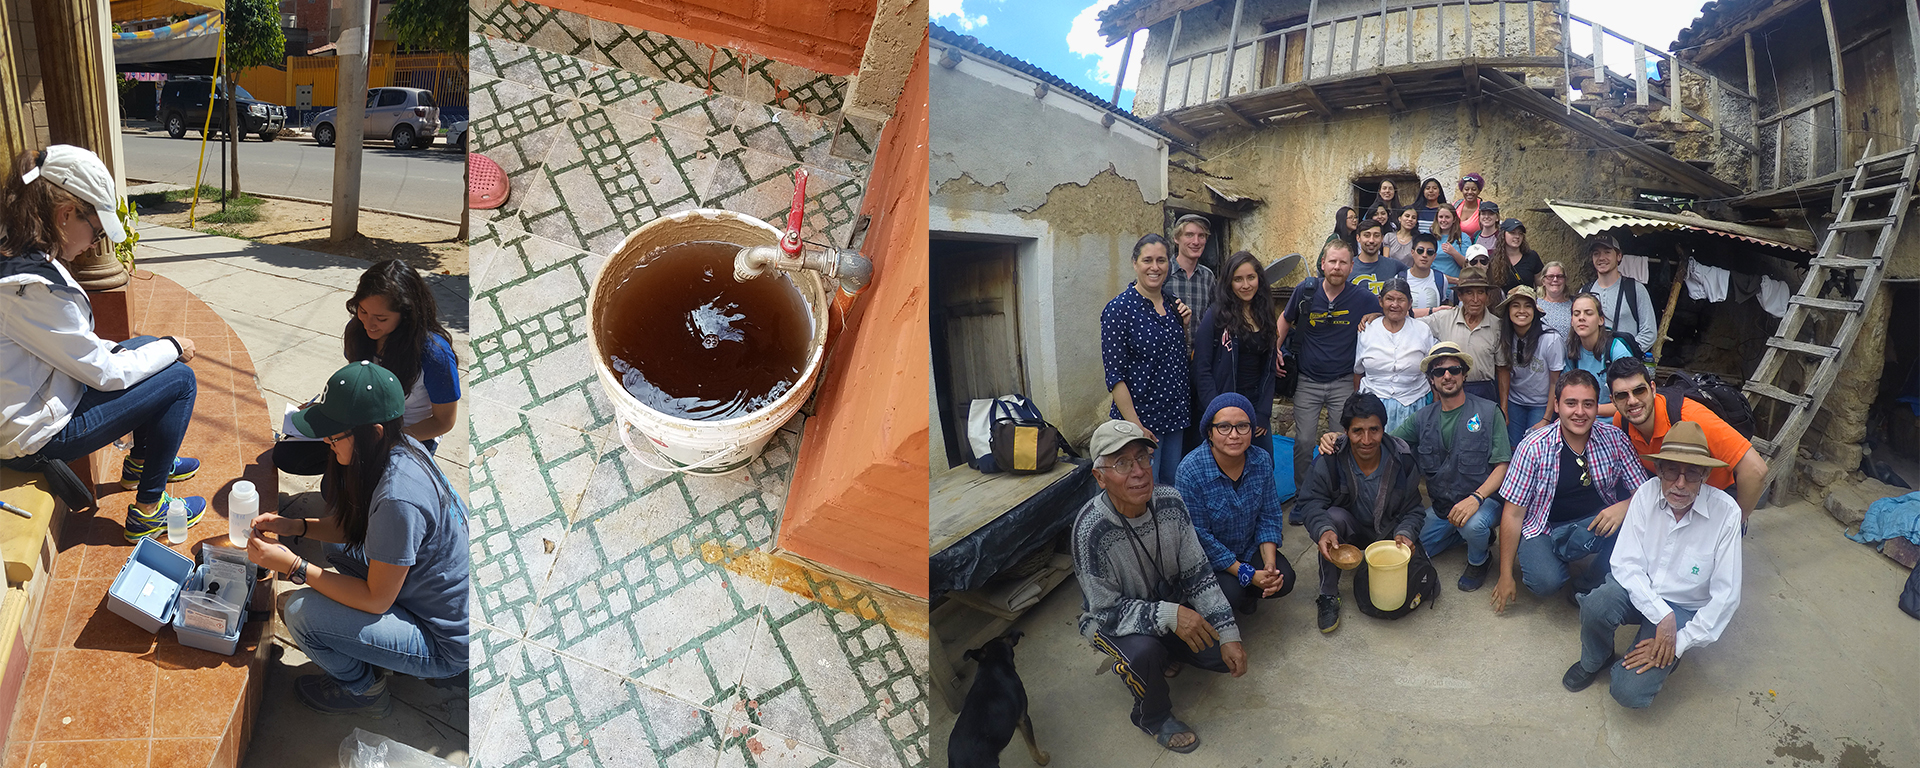 Three students with a testing kit on a city stoop; a bucket filled with brown water on a tile floor; a group photo including some local people